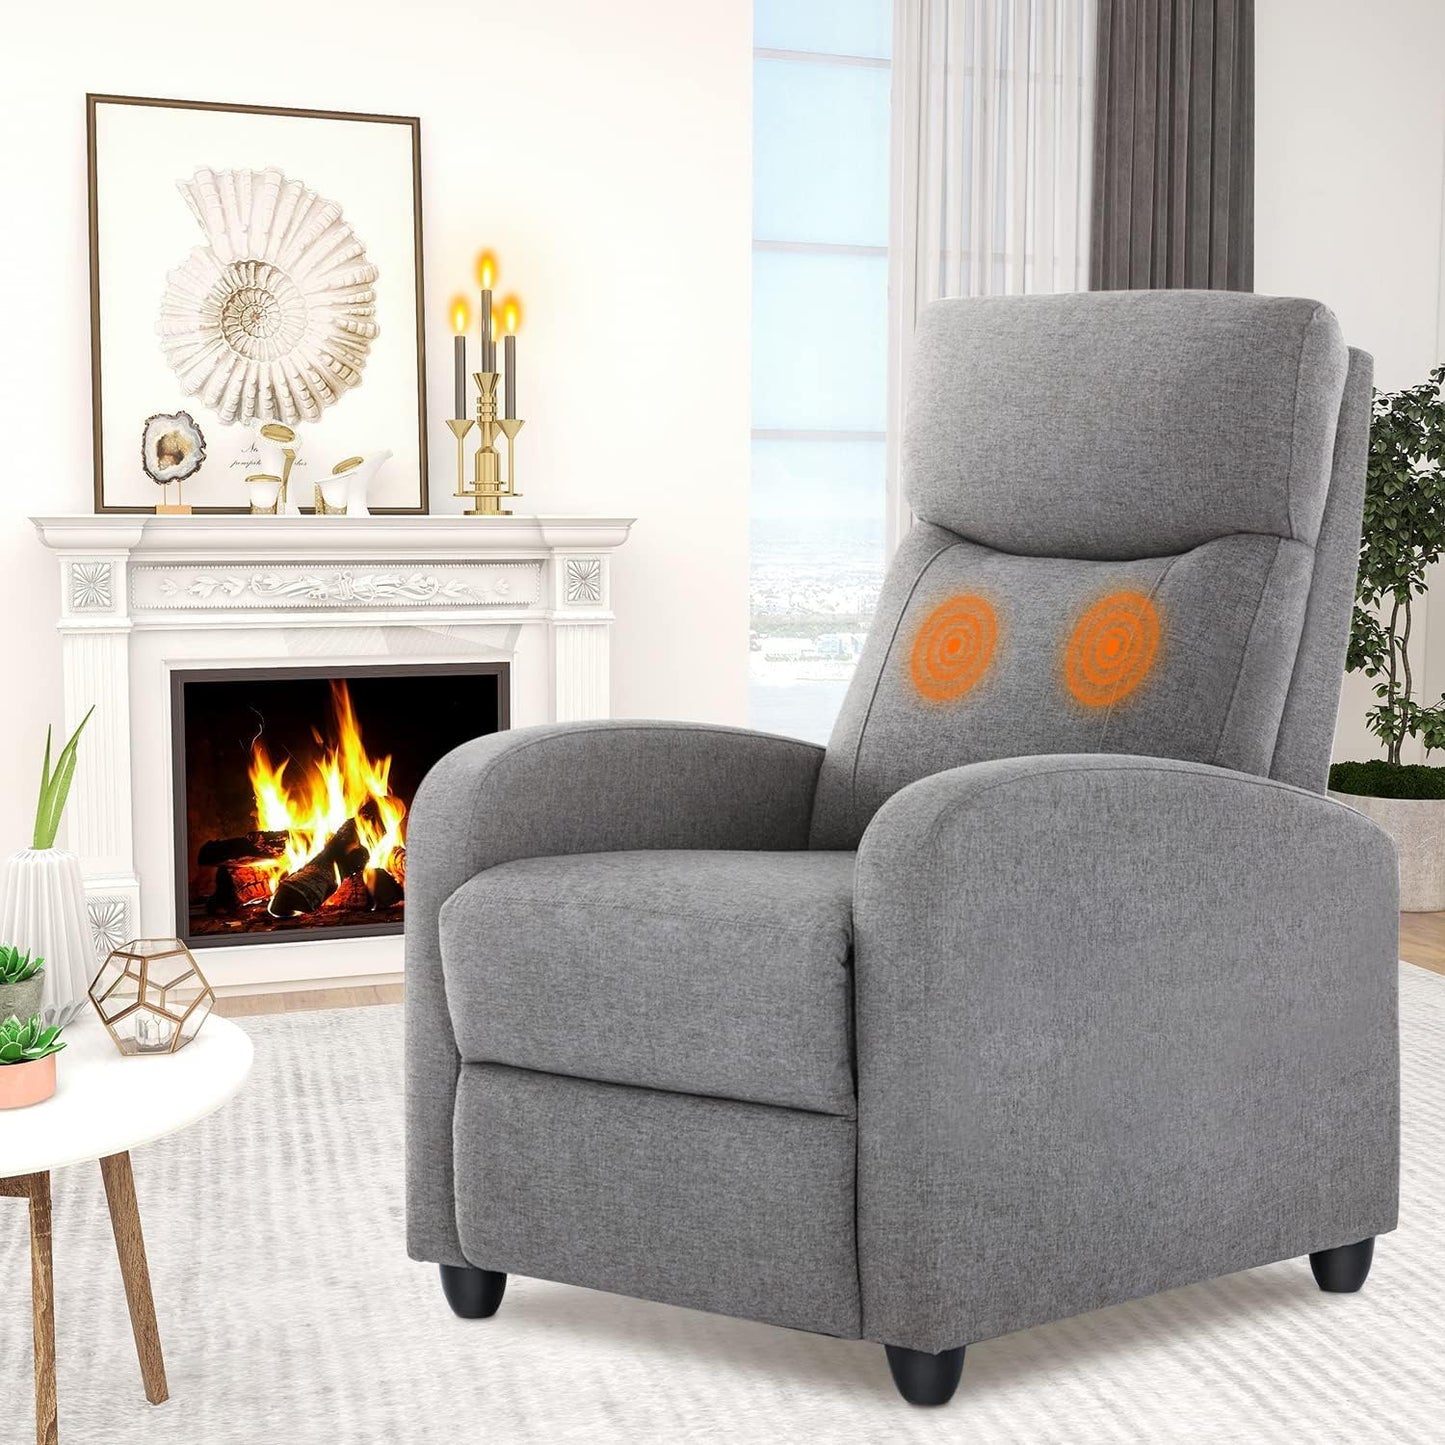 NEW - Sweetcrispy Recliner Chair for Adults, Massage Fabric Small Recliner Home Theater Seating with Lumbar Support, Adjustable Modern Reclining Chair with Padded Seat Backrest for Living Room (Deep Grey) - Retail $107